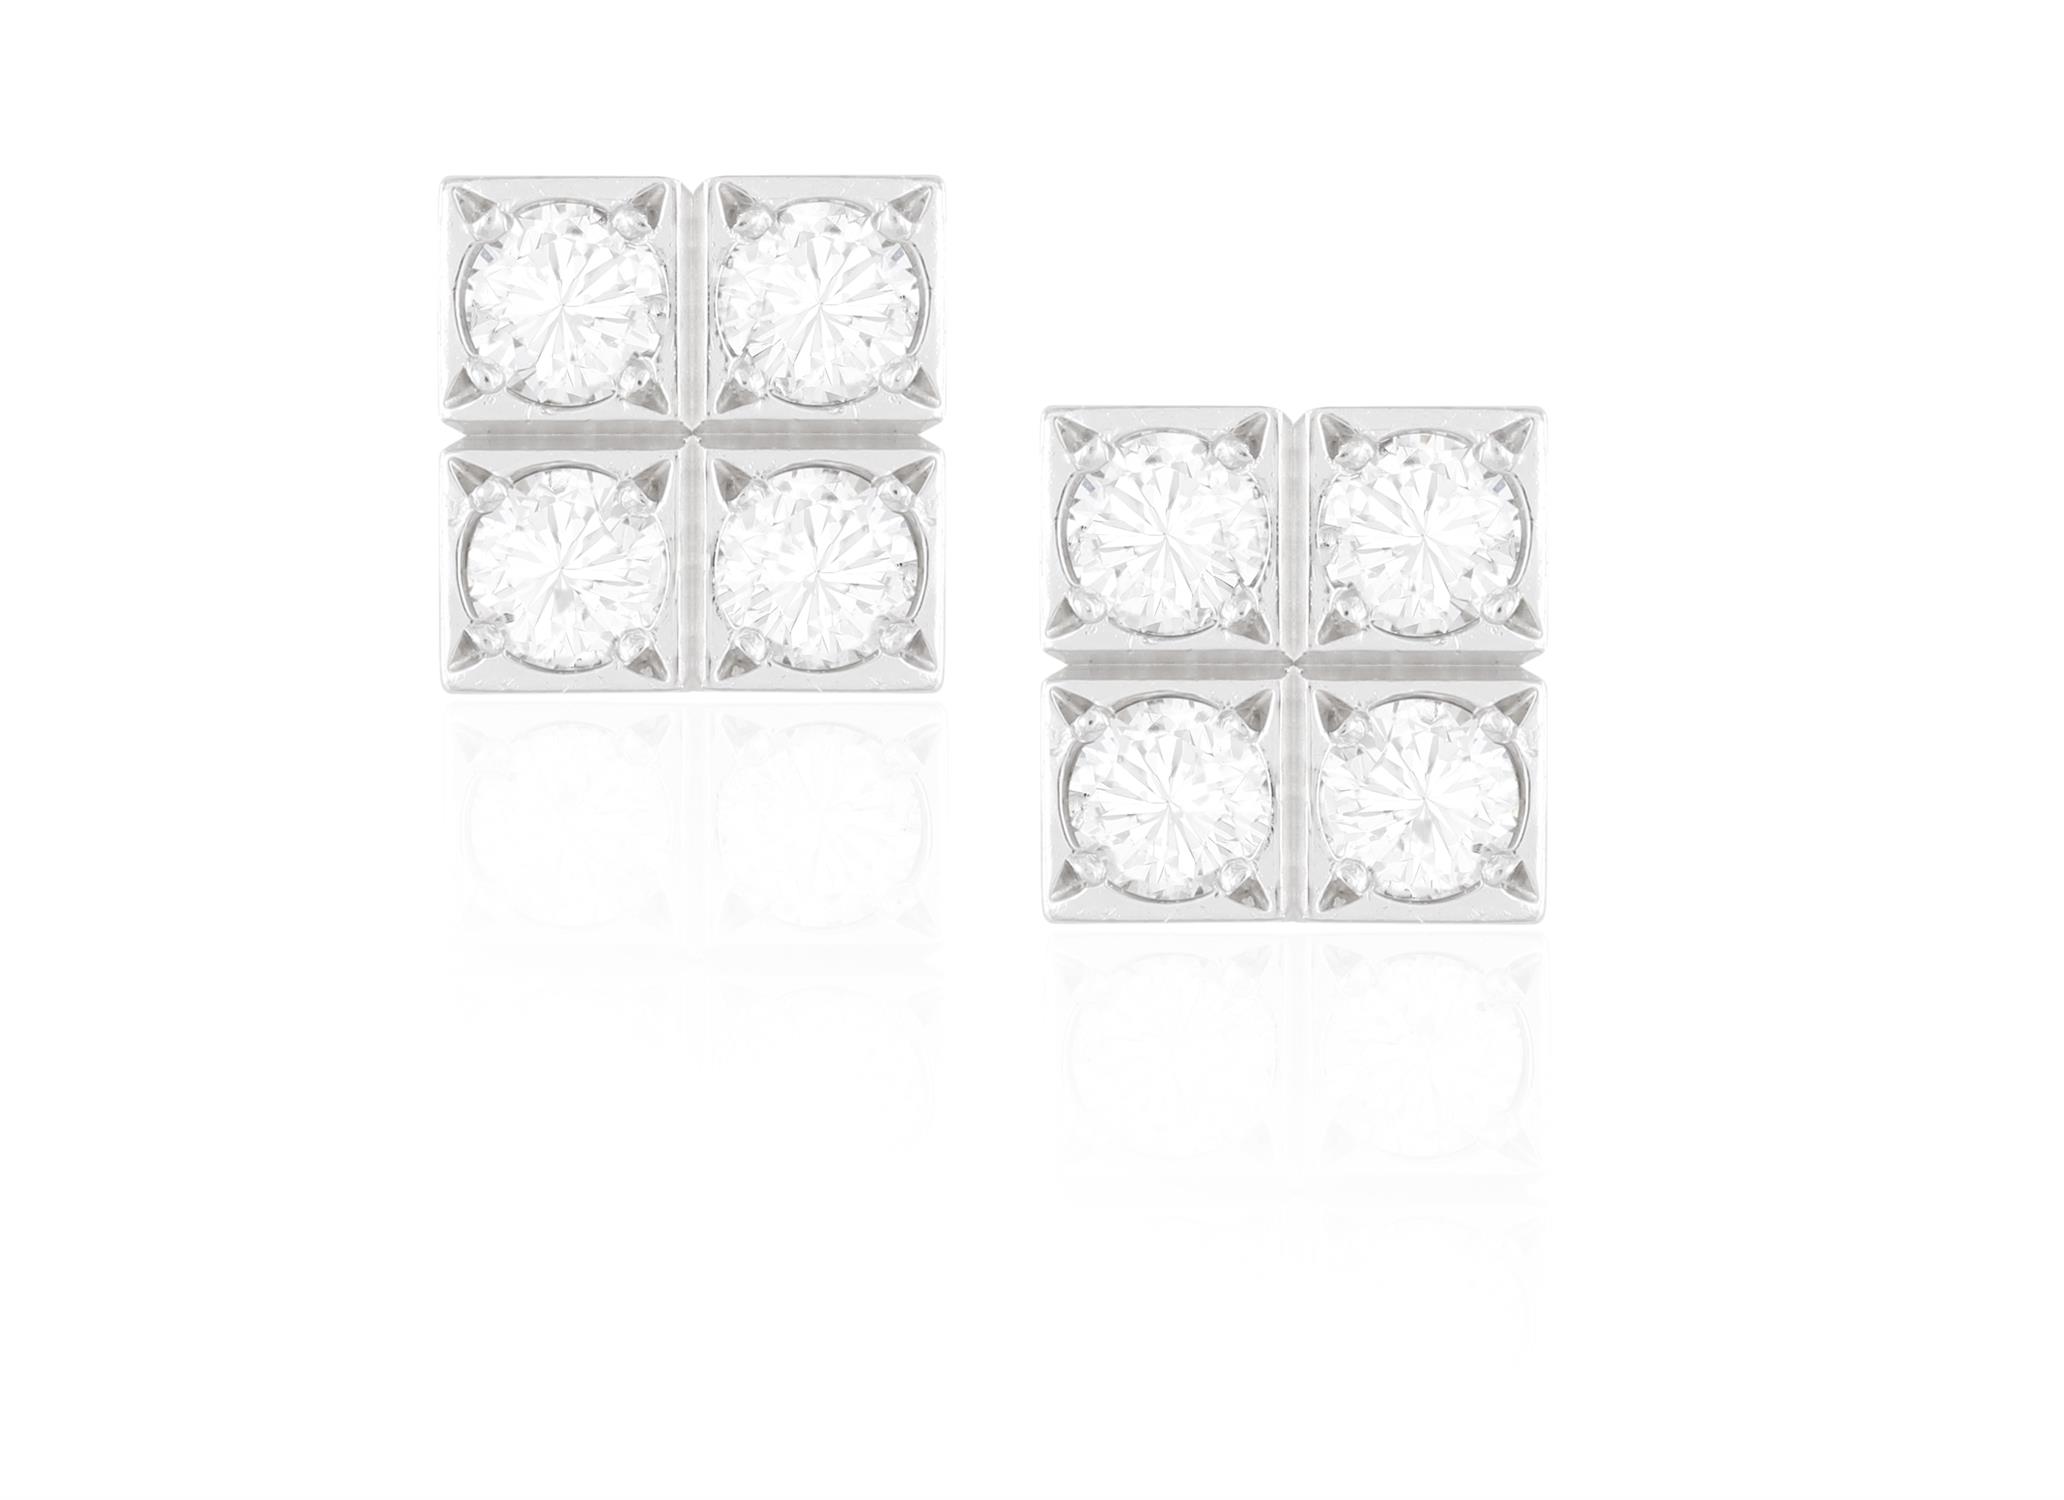 A PAIR OF DIAMOND EARSTUDS, BY CARTIER Each square plaque set with four brilliant-cut diamonds,